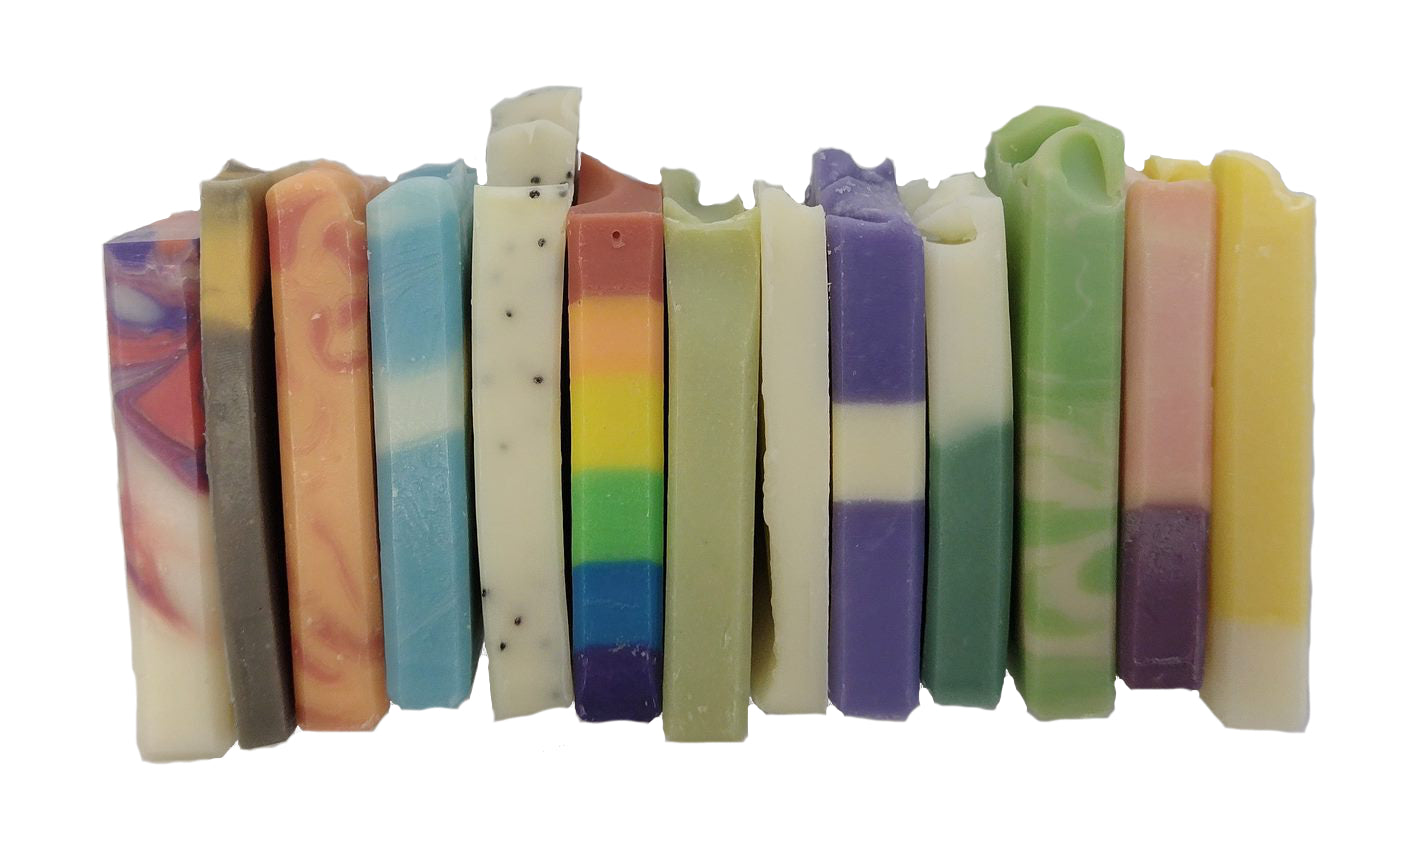 Image of all the sample soap bars available